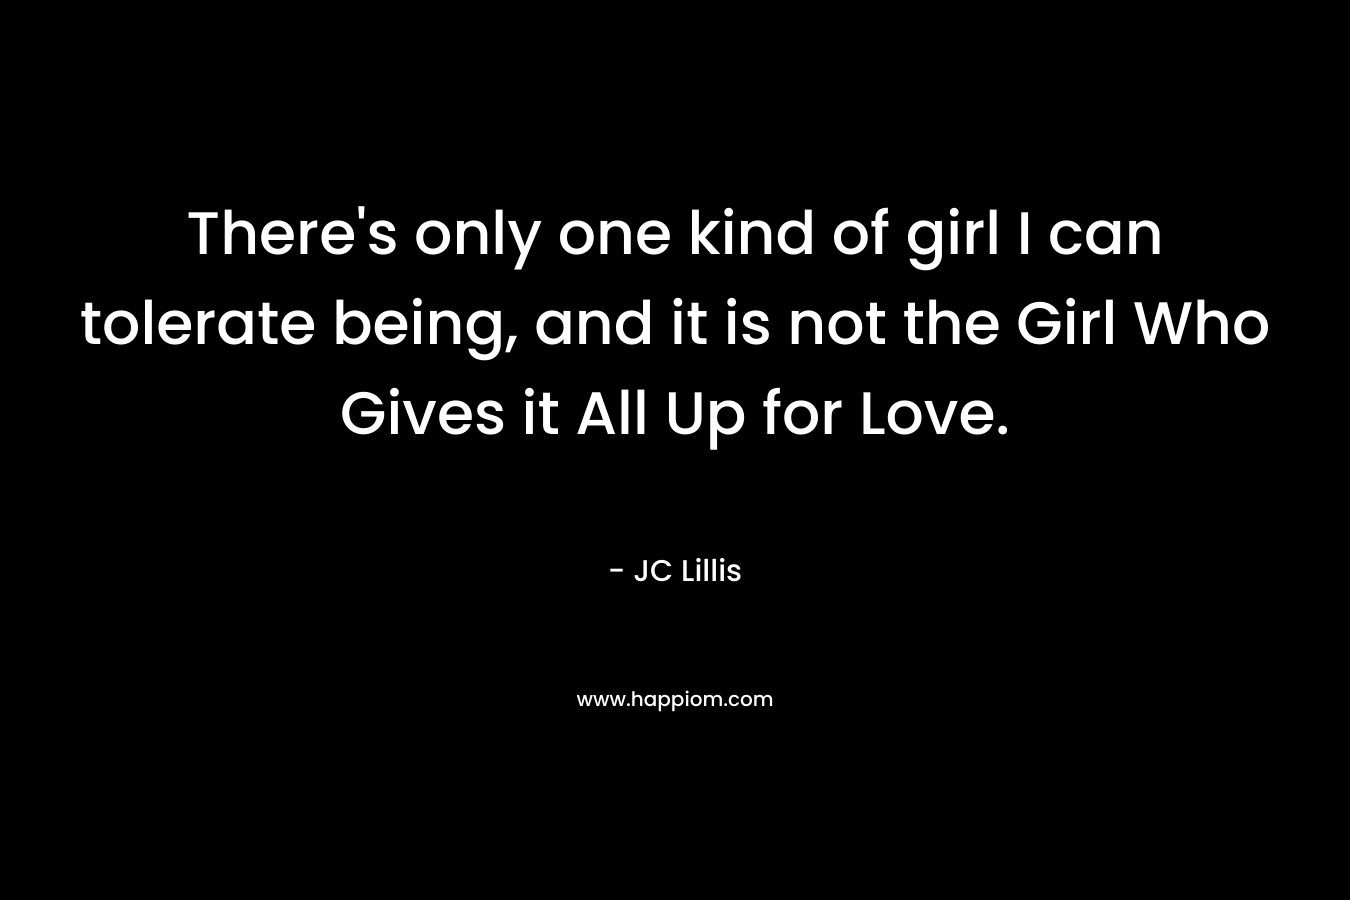 There’s only one kind of girl I can tolerate being, and it is not the Girl Who Gives it All Up for Love. – JC Lillis